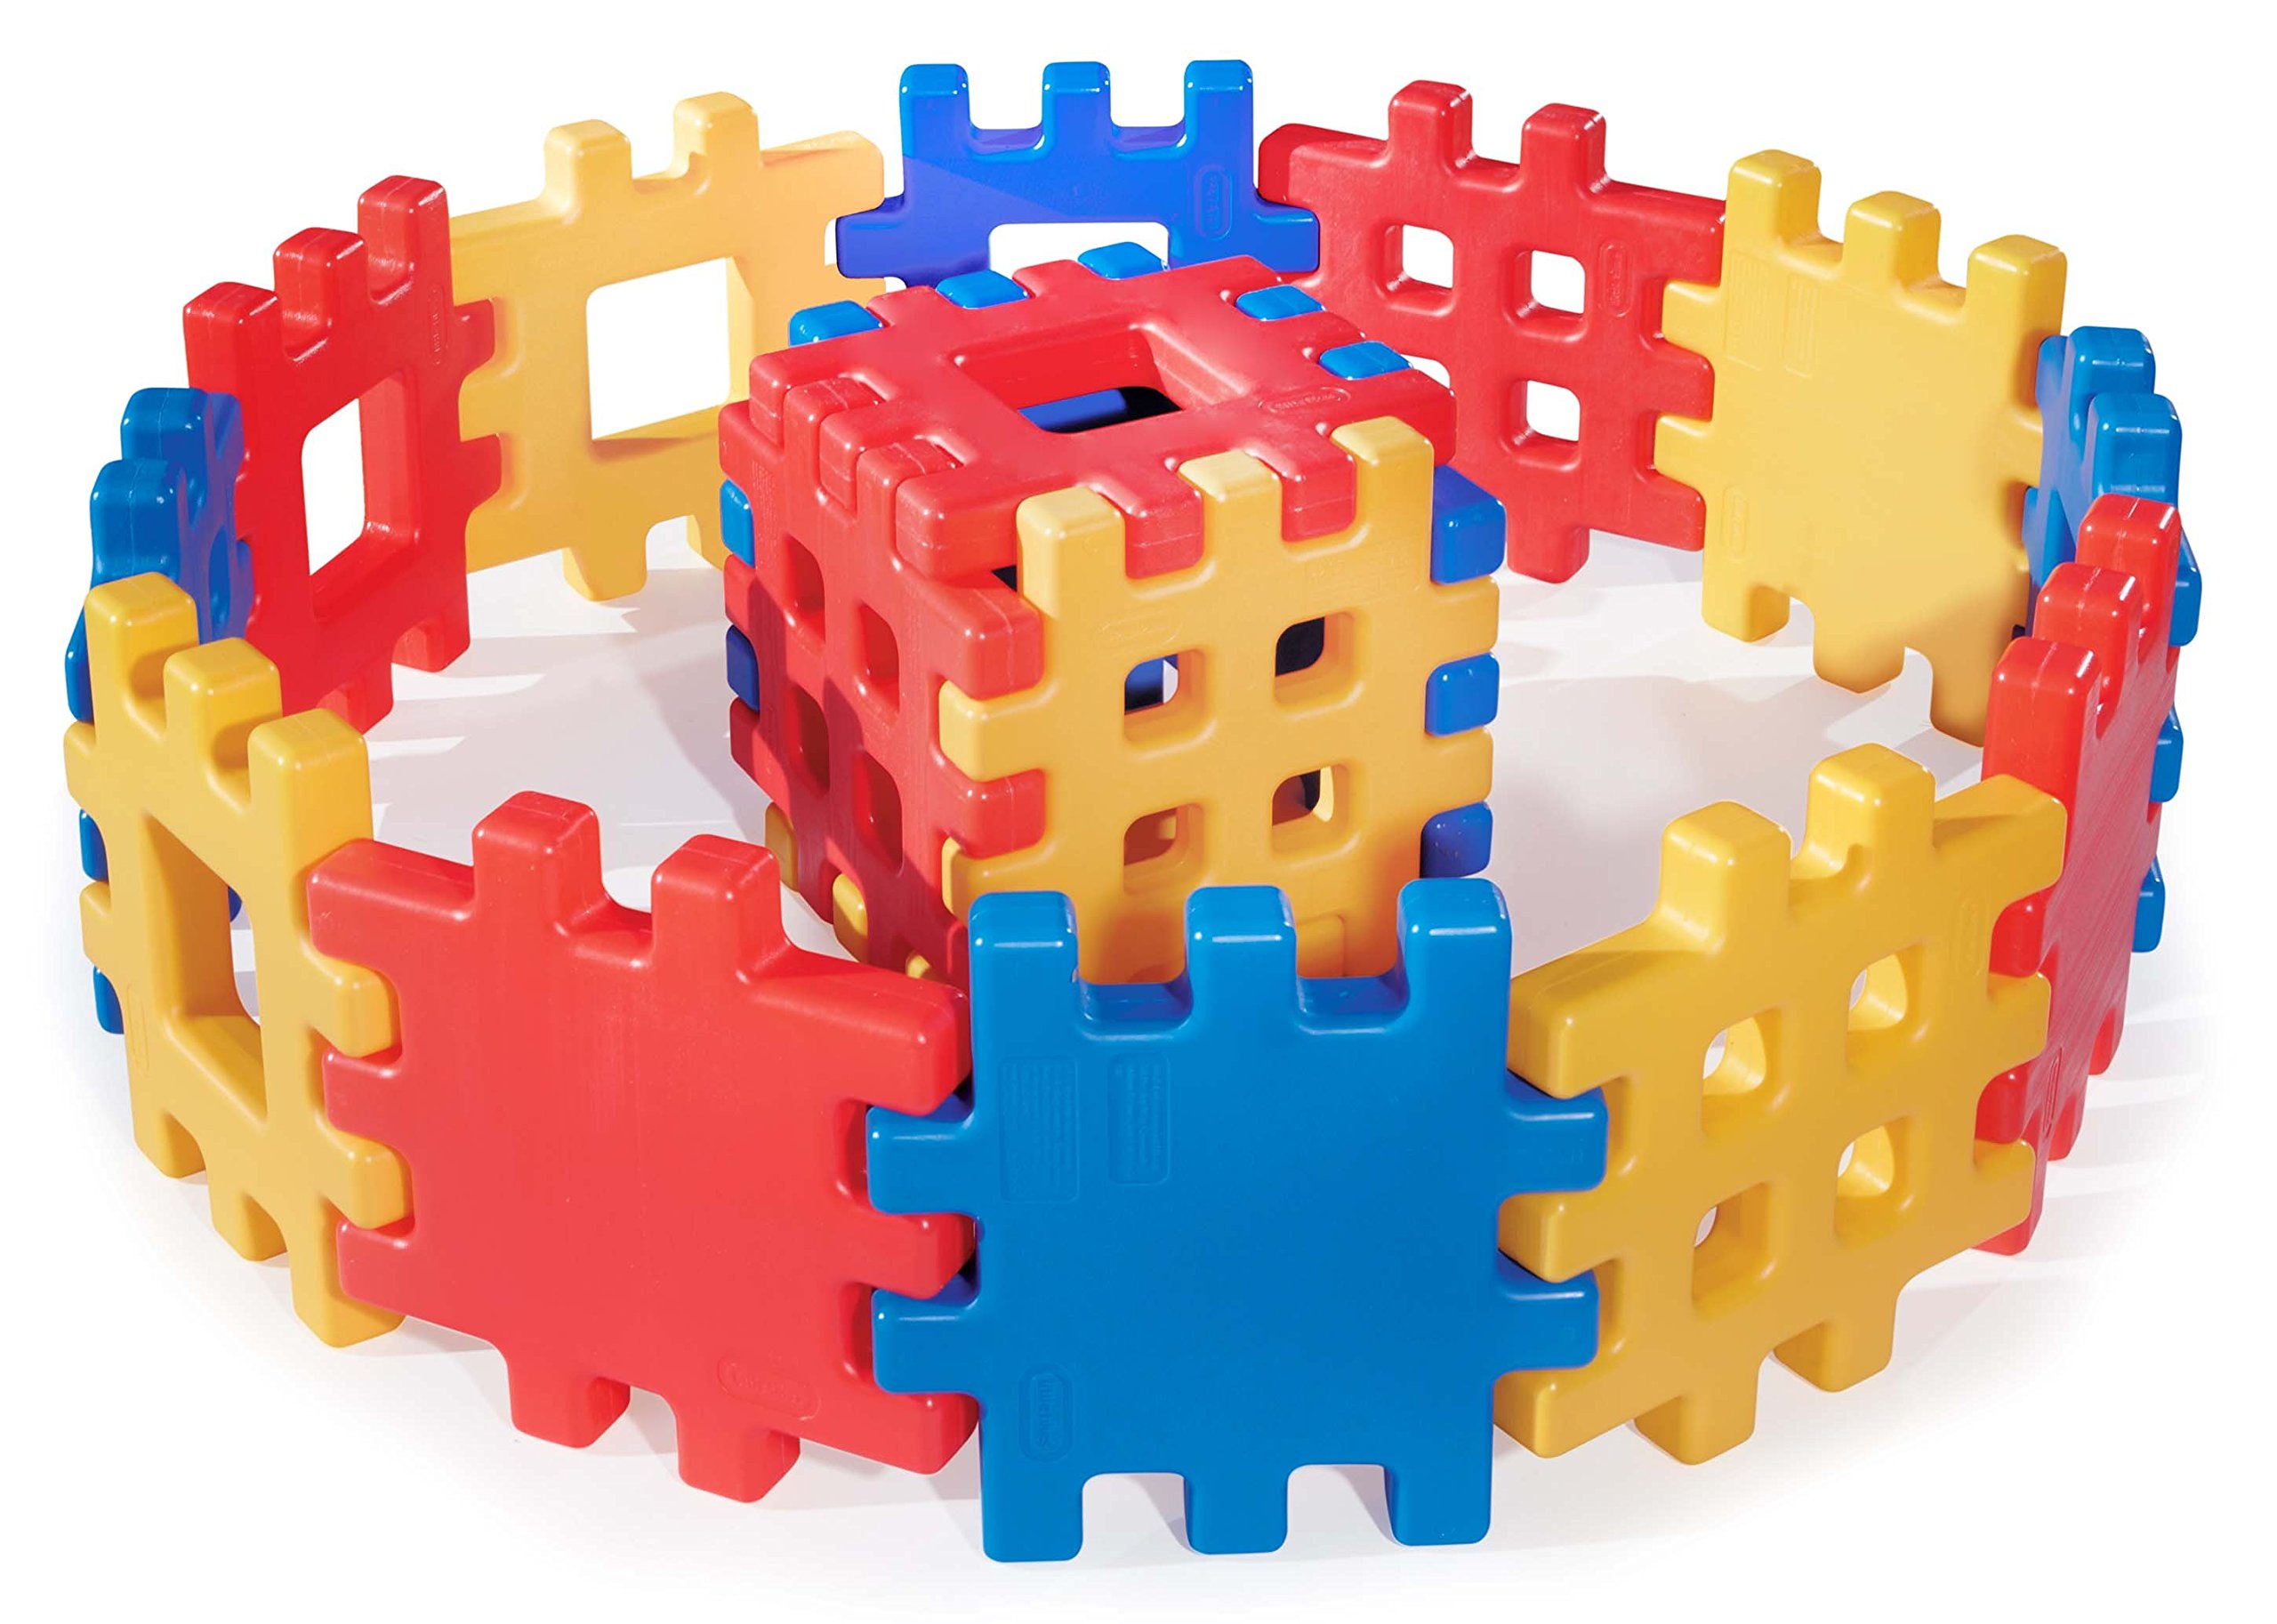 Little Tikes Big Waffle Block Set - 18 pieces, Blue/Red/Yellow